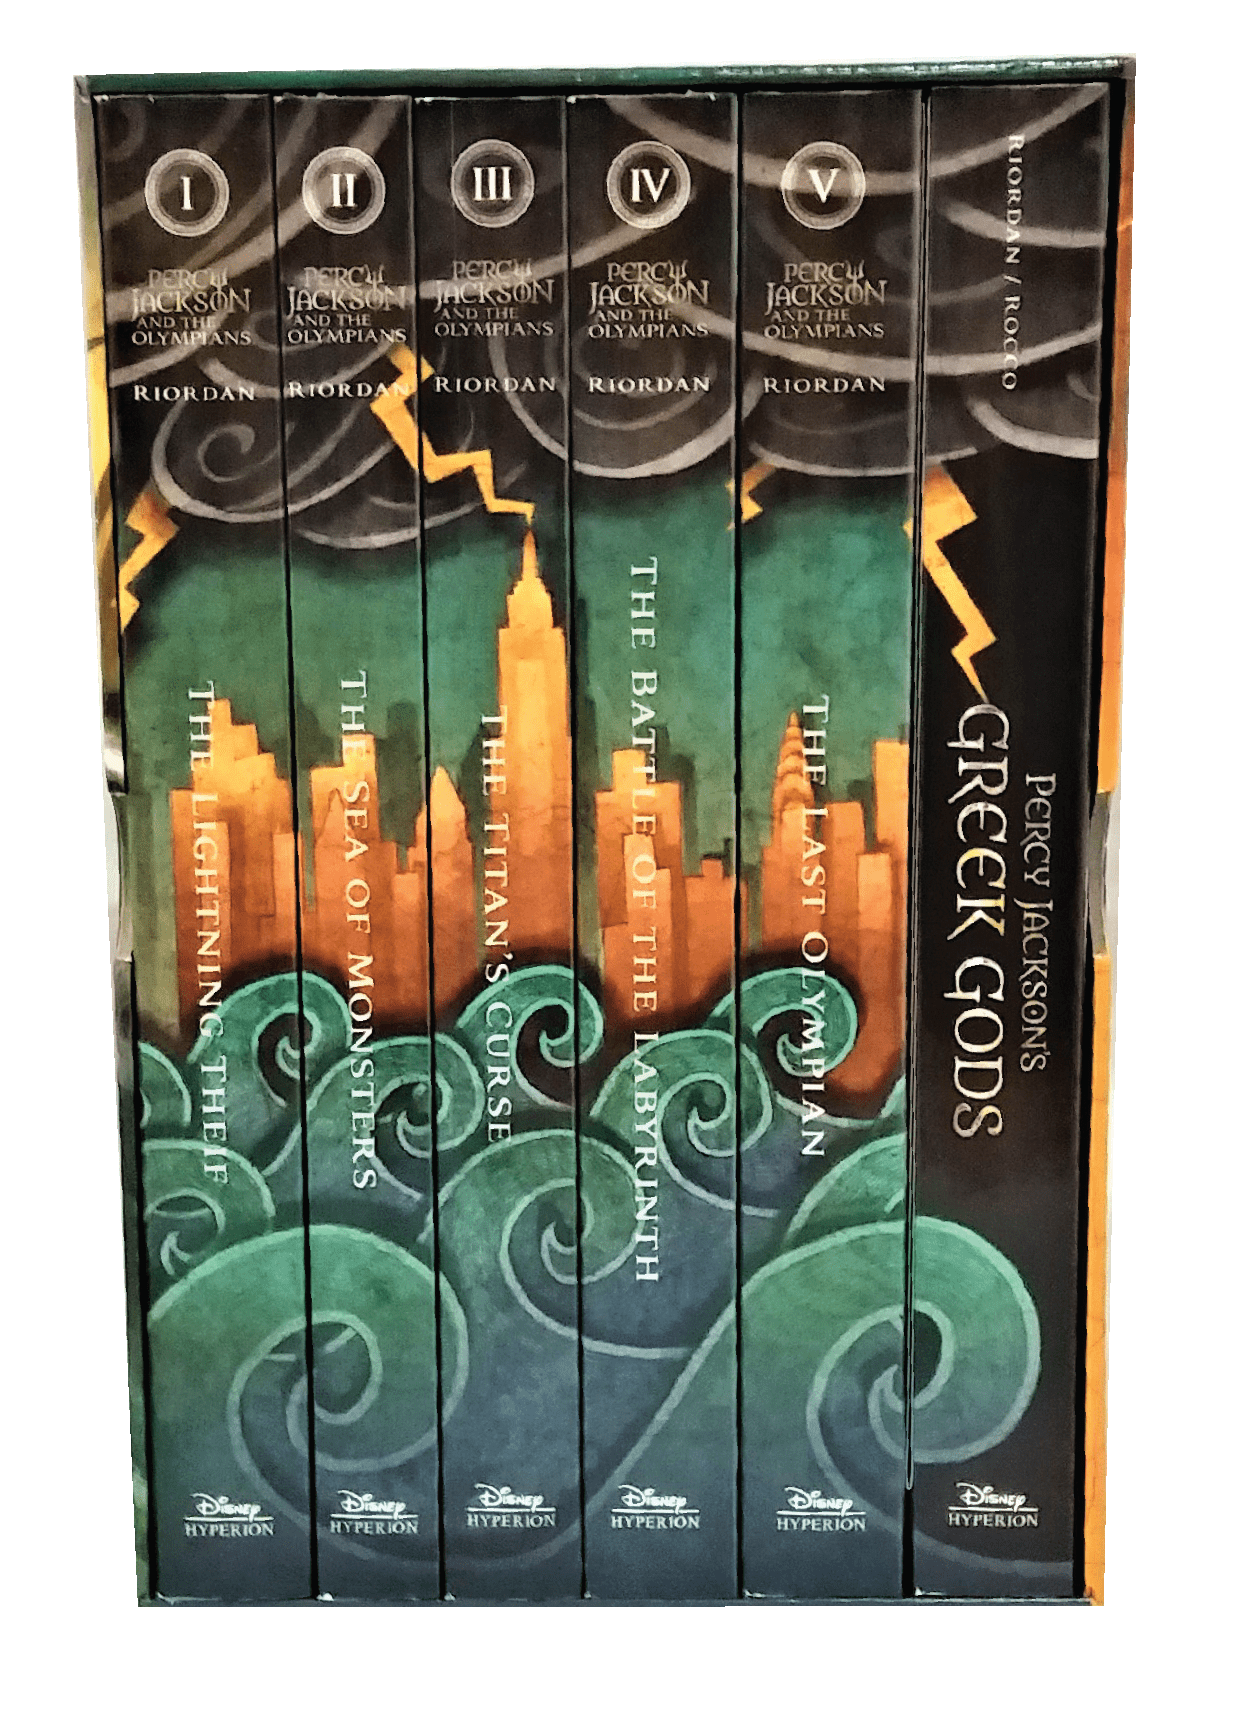 Percy Jackson And The Olympians - The Complete Series (Box Set)